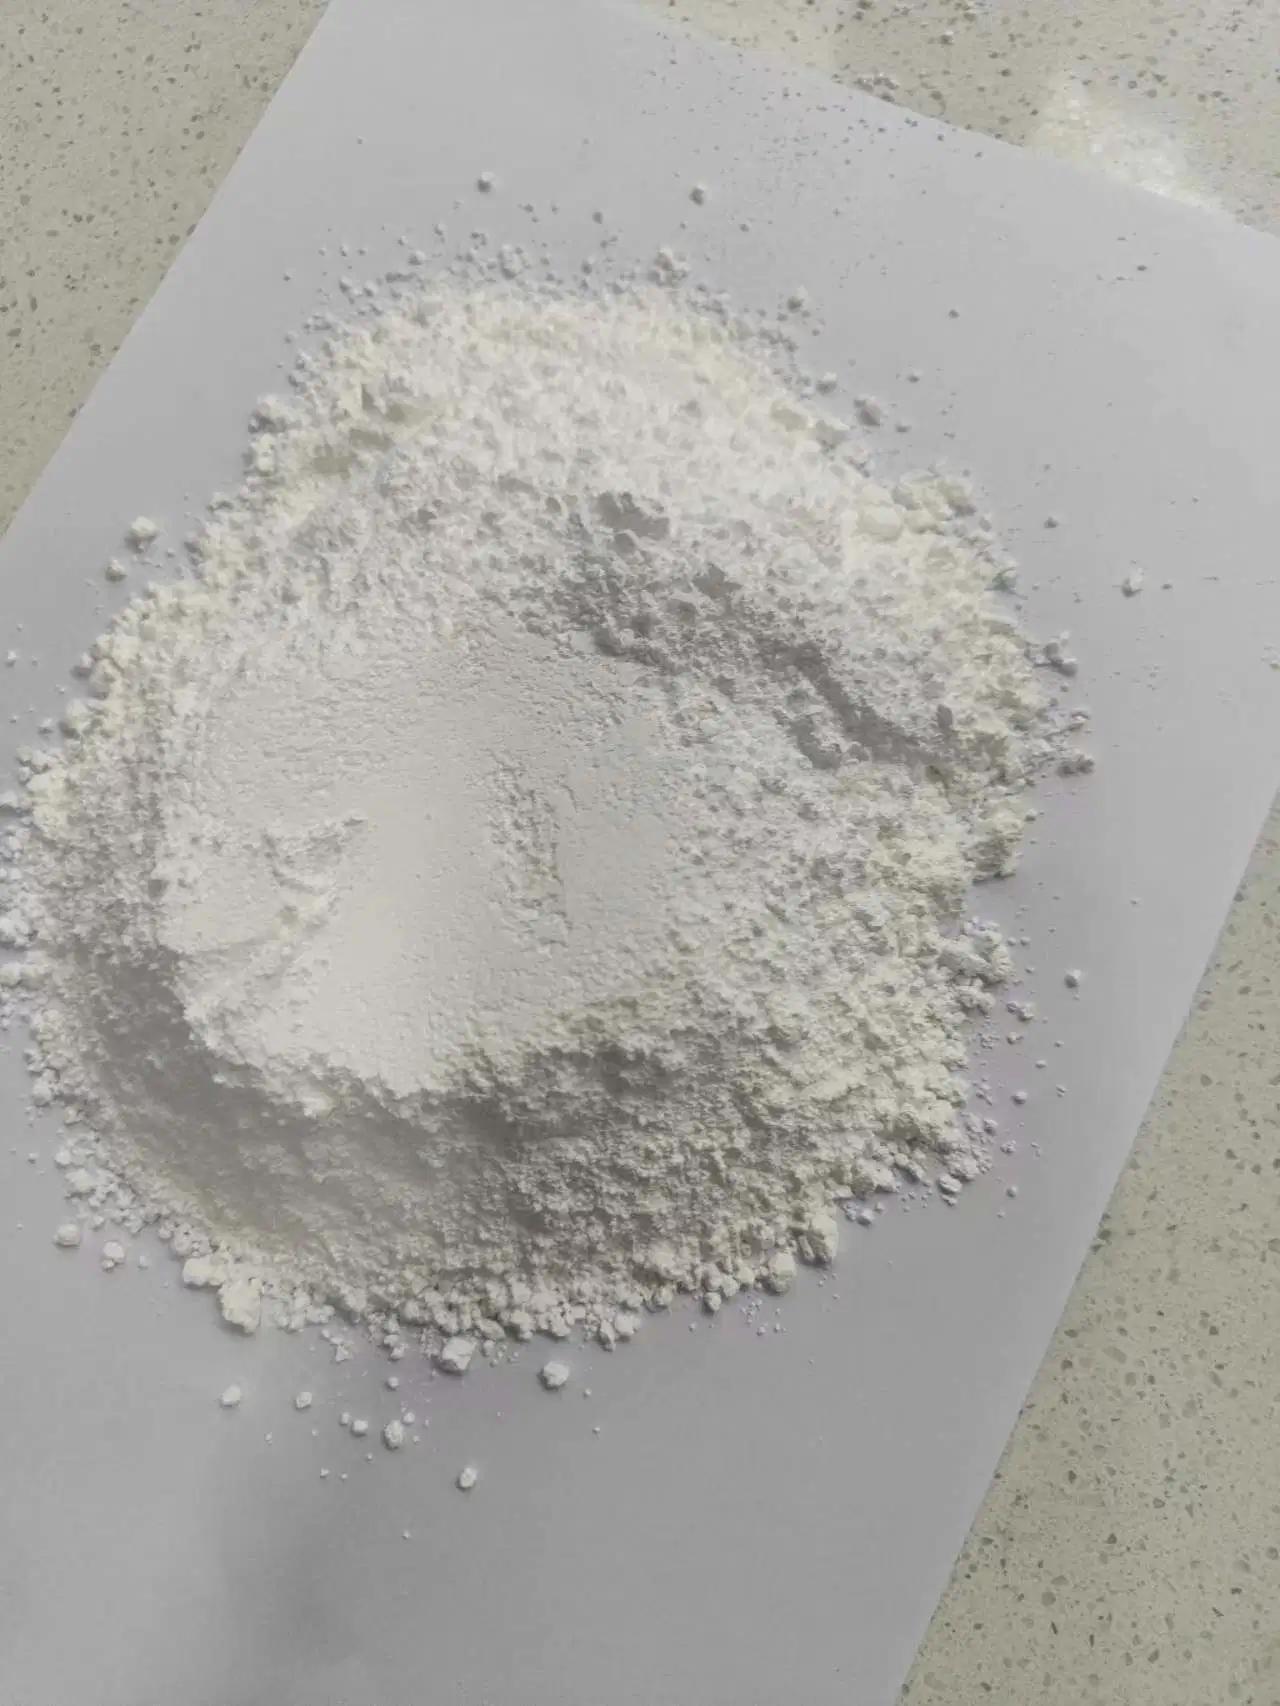 Nickel Oxidants Oxide Powder for Magnetic Materials and Soft Magnetic Nickel Core Materials